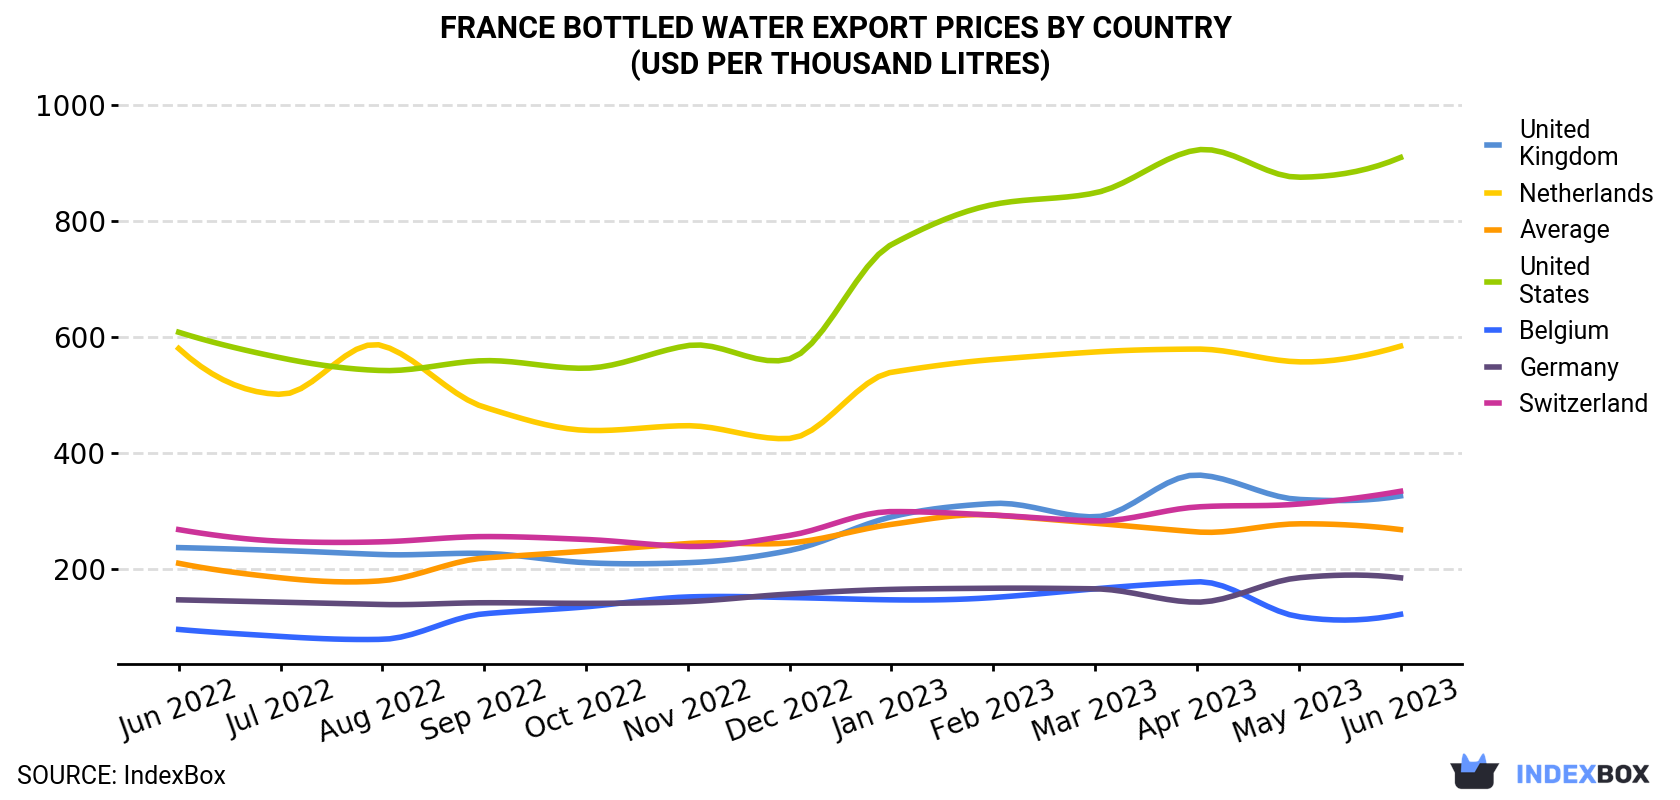 France Bottled Water Export Prices By Country (USD Per Thousand Litres)